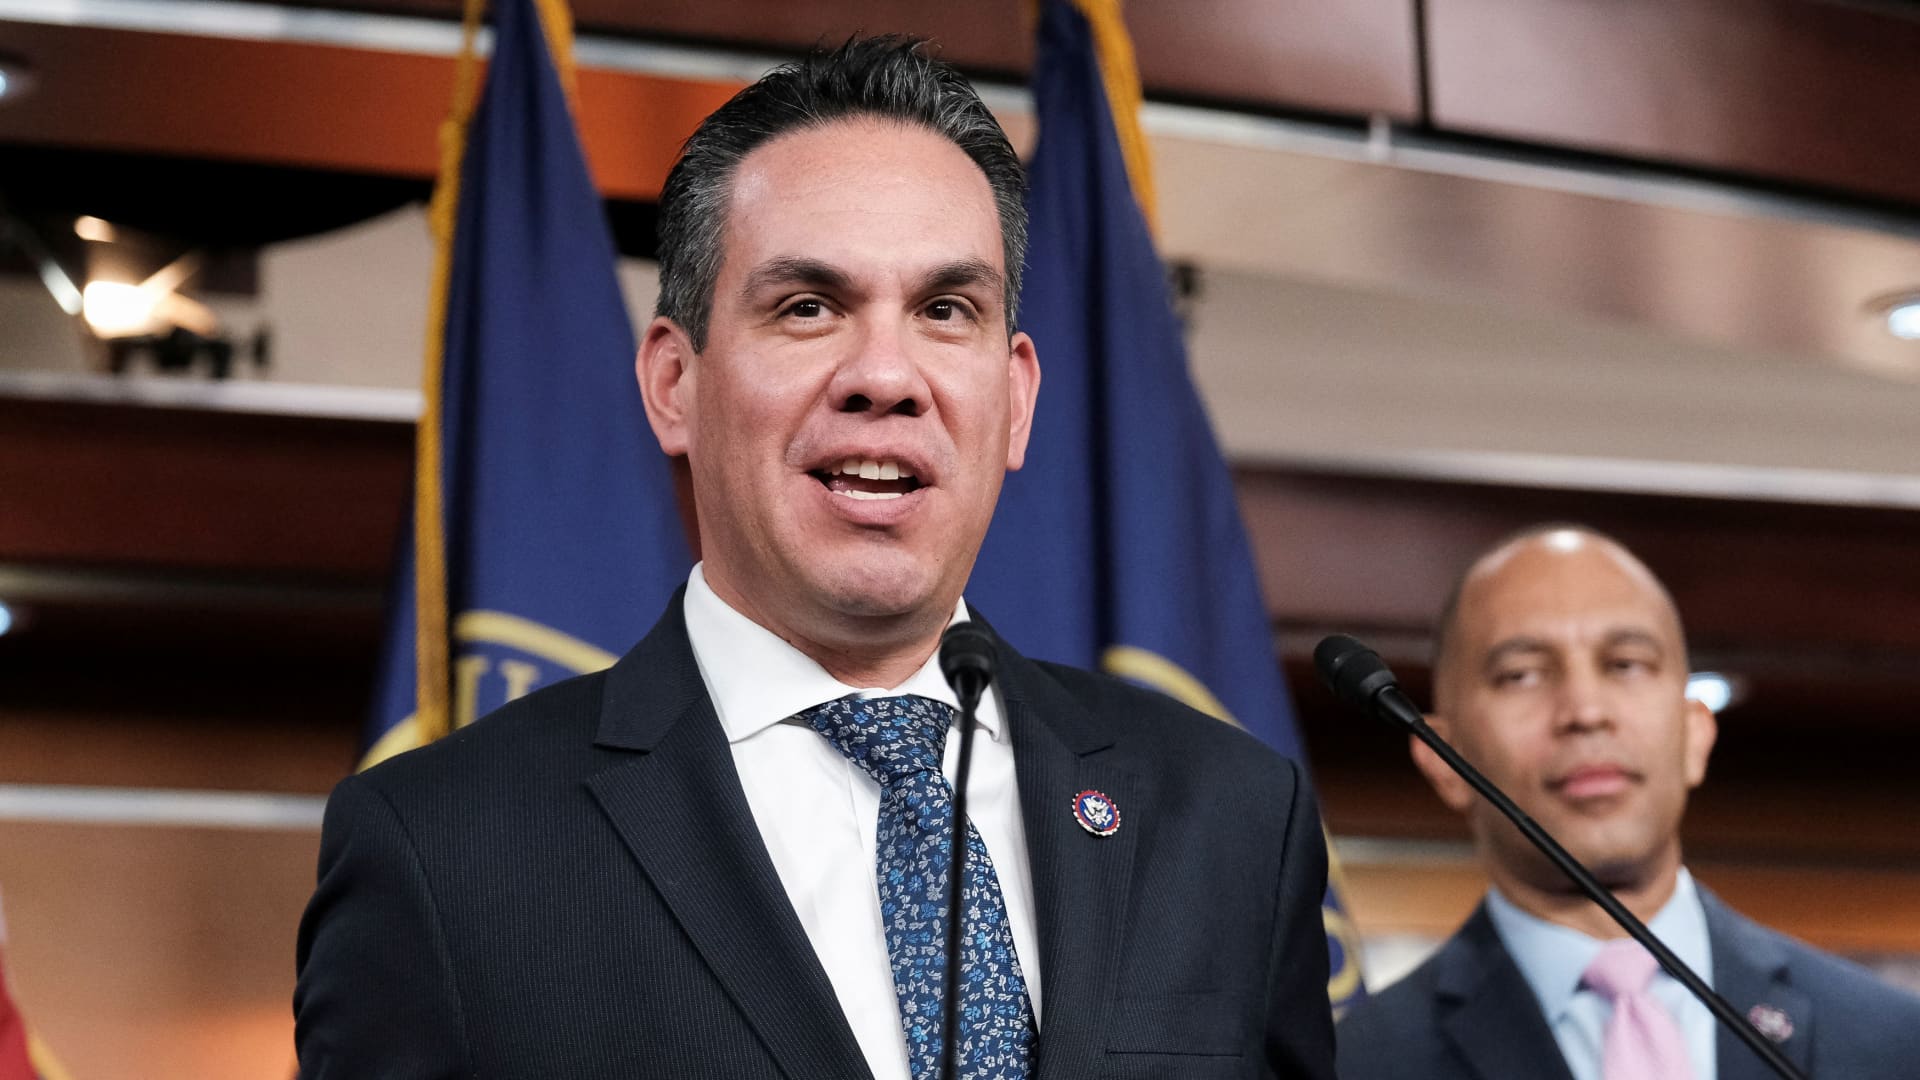 U.S. Rep. Pete Aguilar (D-CA) speaks at House Leadership news conference after Rep. Hakeem Jeffries (D-NY) was elected as the new Democratic leader in the House of Representatives for the next session of Congress, on Capitol Hill in Washington, November 30, 2022.